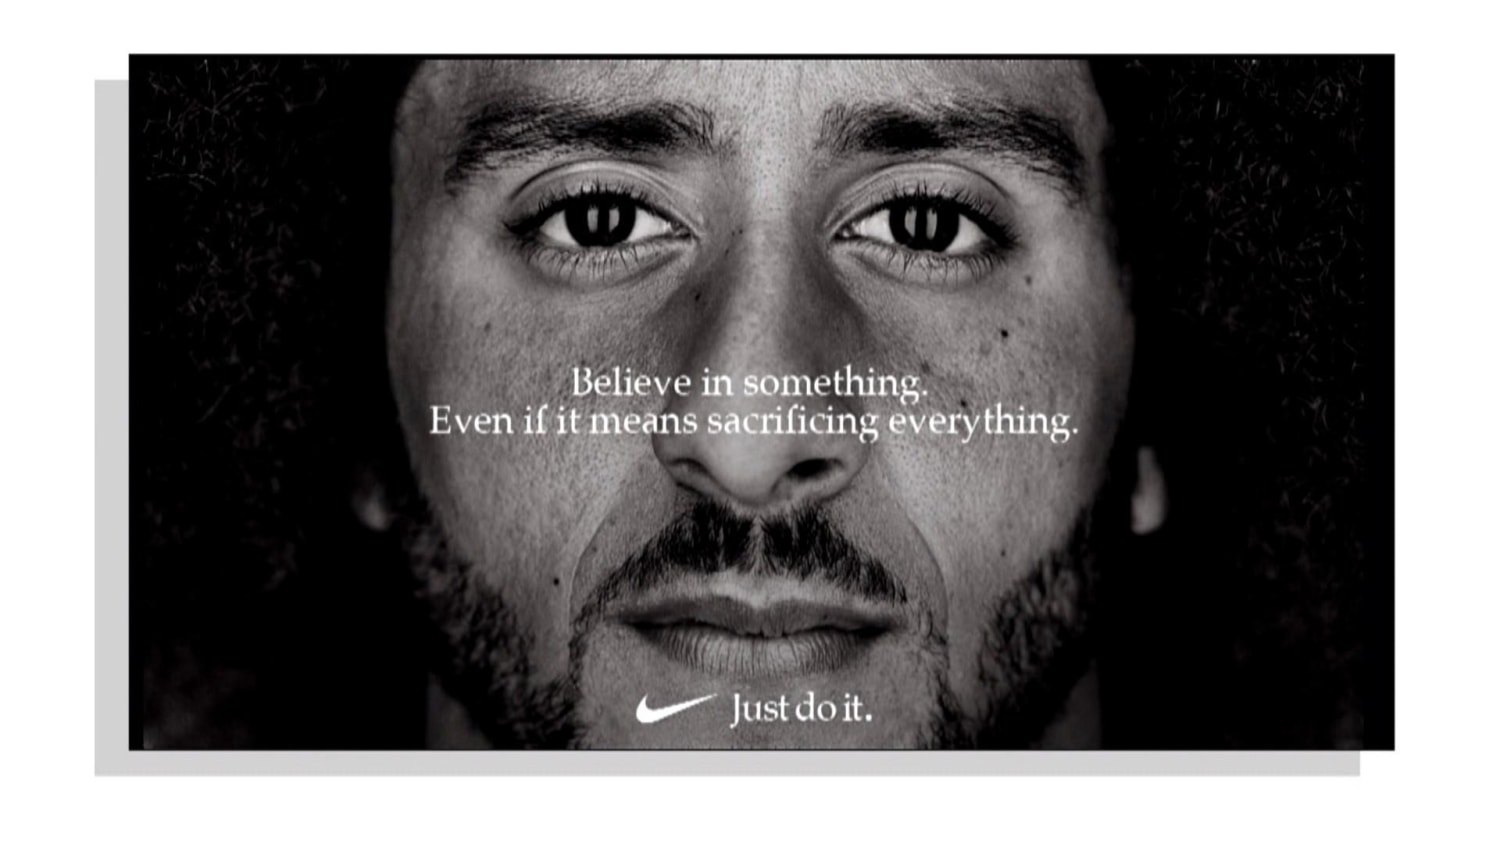 Imitación Labor miembro Nike doubles down on defiance of Kaepernick criticism, releases full-length  TV ad